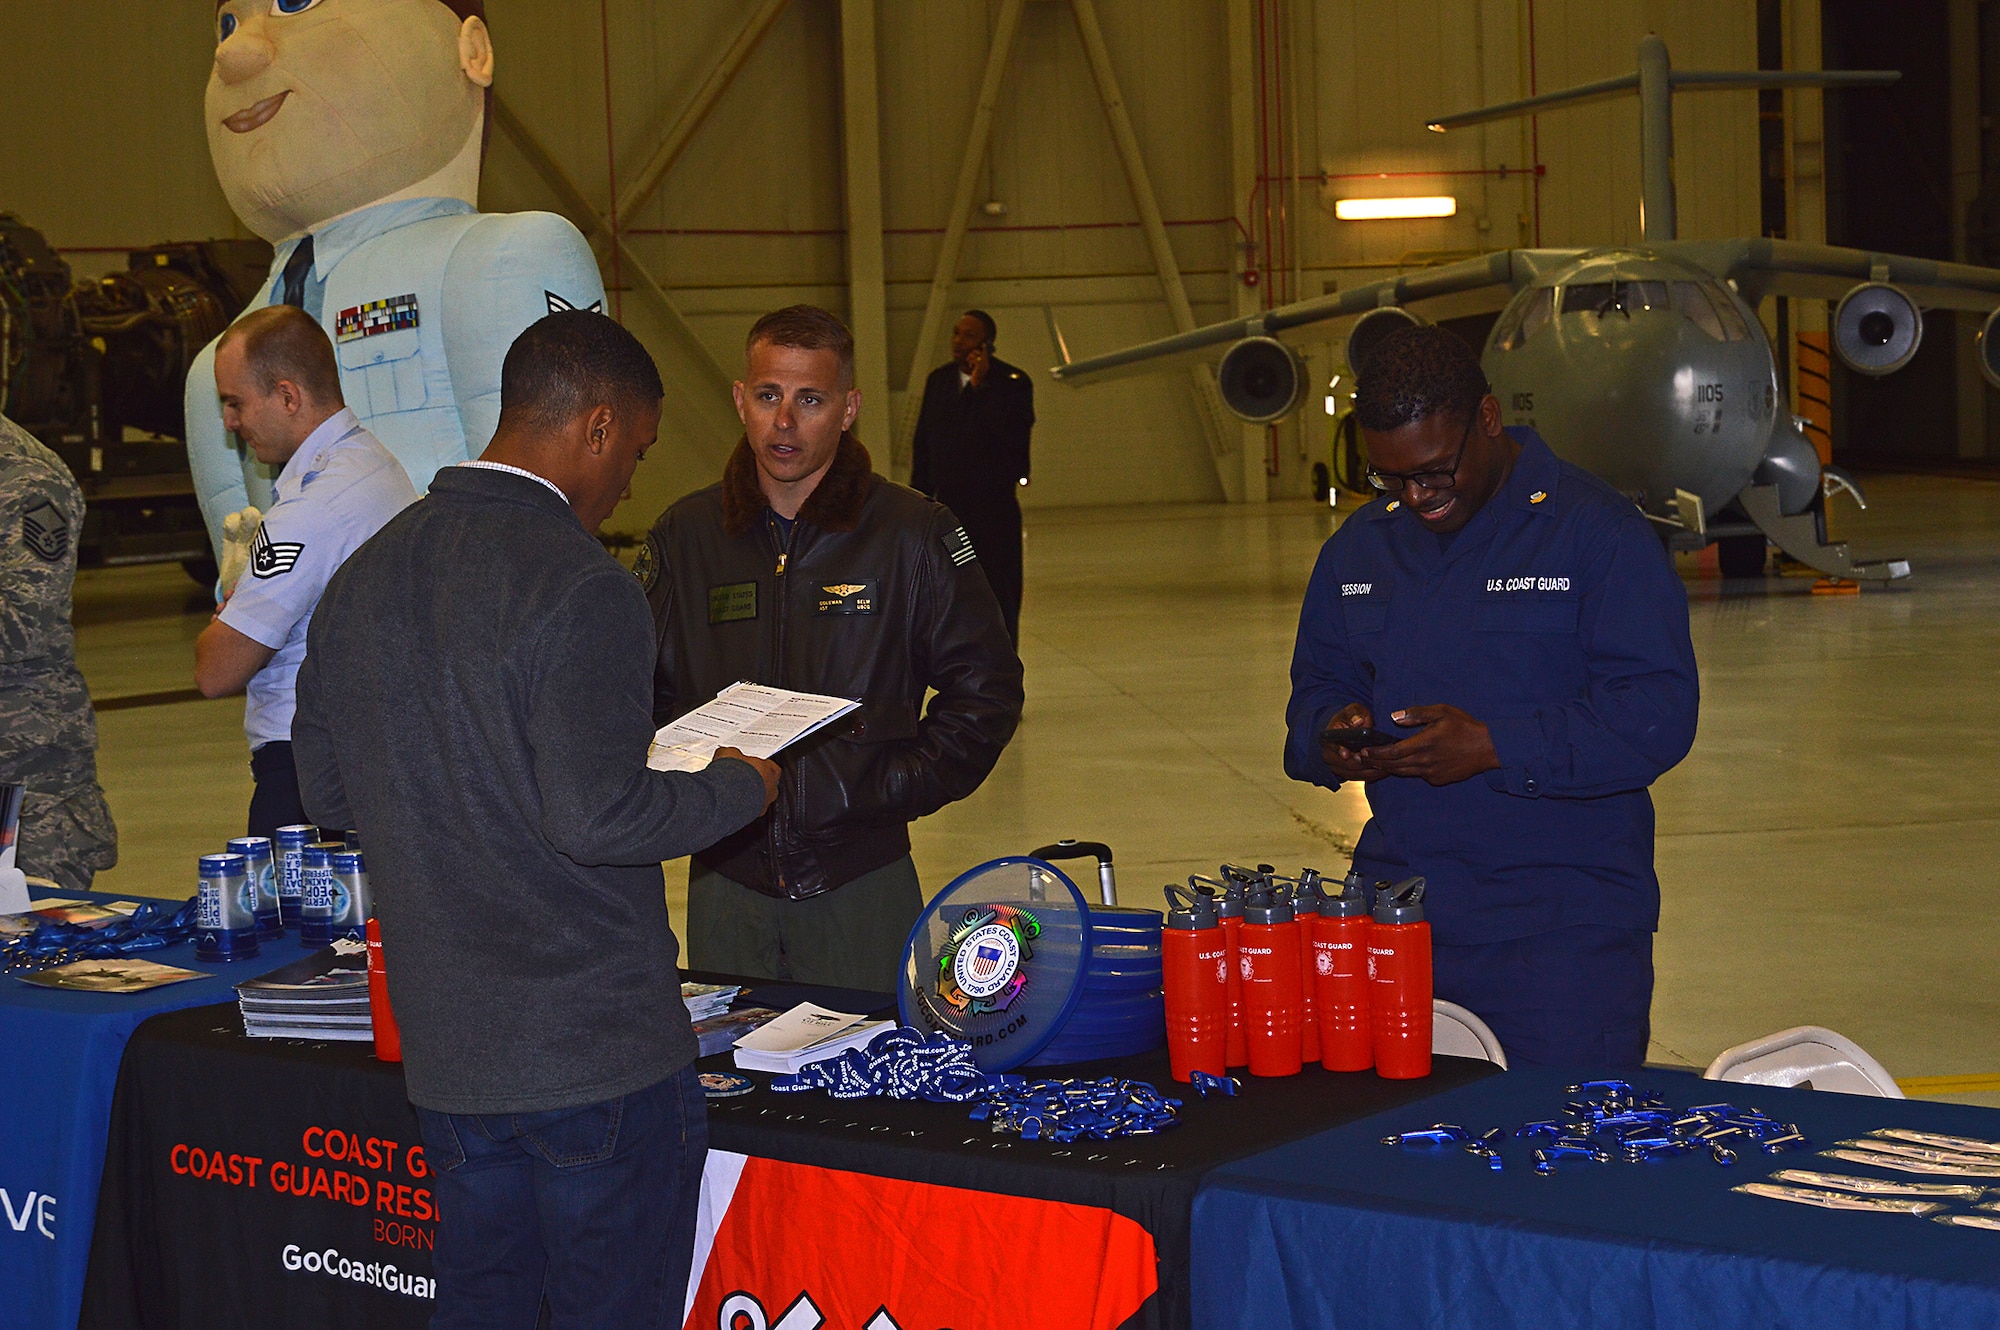 Aviation Survival Technician Colman Selm, a Coast Guard rescue swimmer in Charleston, tells a student about career options in the Coast Guard during the Joint Base Charleston Tuskegee Airmen Career Day Feb. 25, 2016. The 315th Airlift Wing's first Tuskegee Airmen Career Day drew  over 130 local teenage boys to Joint Base Charleston, S.C. to learn about careers in aviation. The event also celebrated the story of the first black pilots in the American military – the Tuskegee Airmen. (courtesy photo by Senior Master Sgt. Eric Keys)